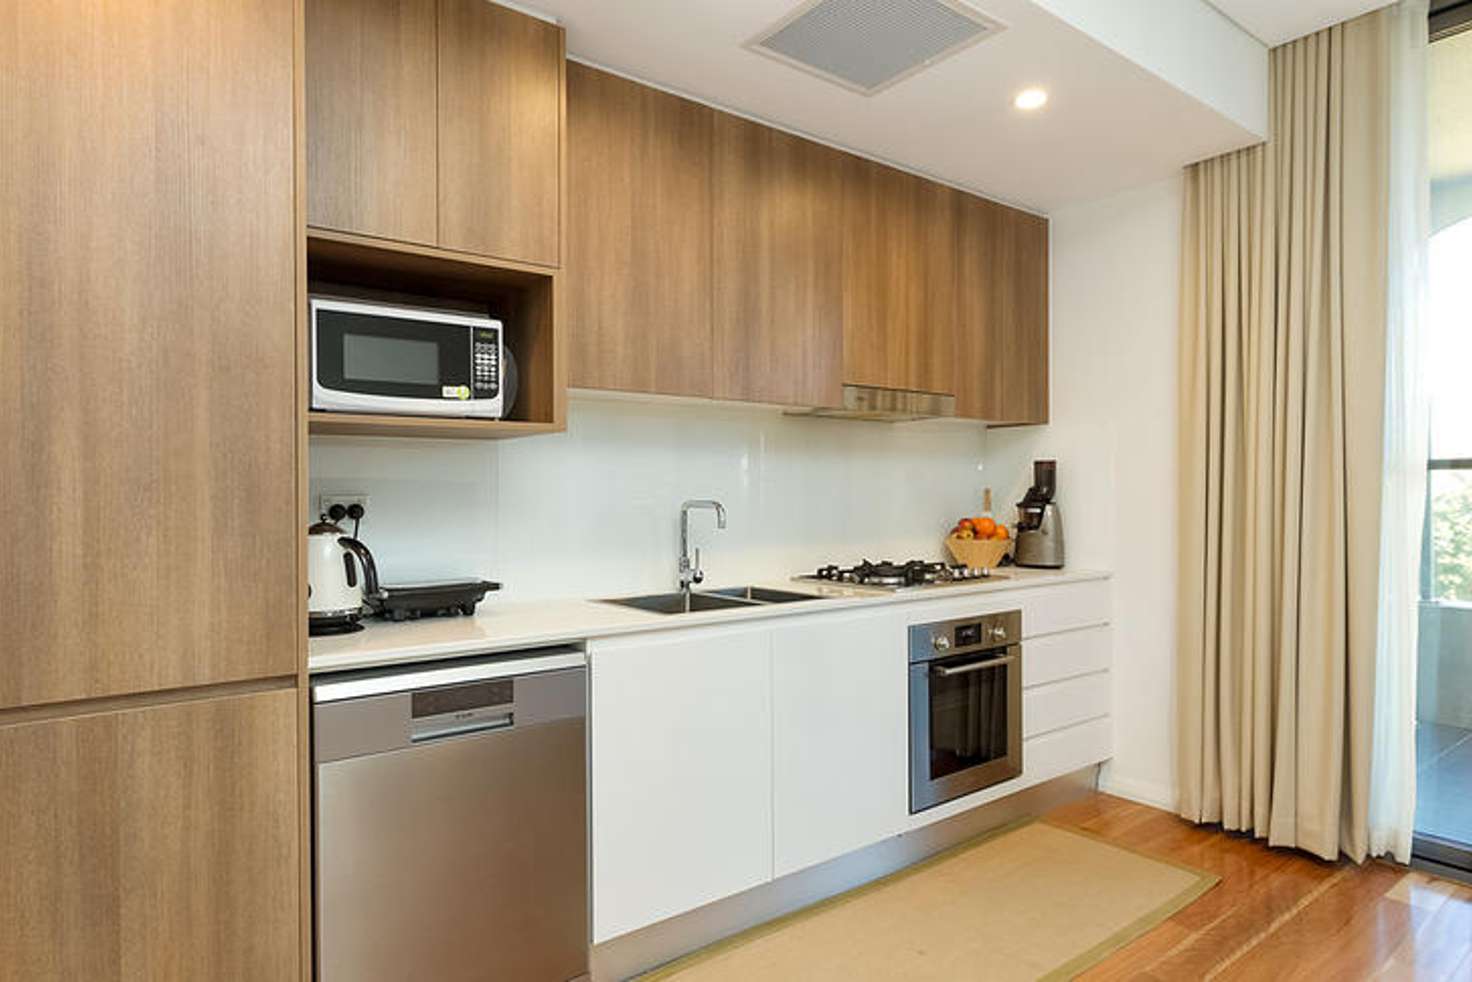 Main view of Homely apartment listing, 105/20 McGill Street, Lewisham NSW 2049